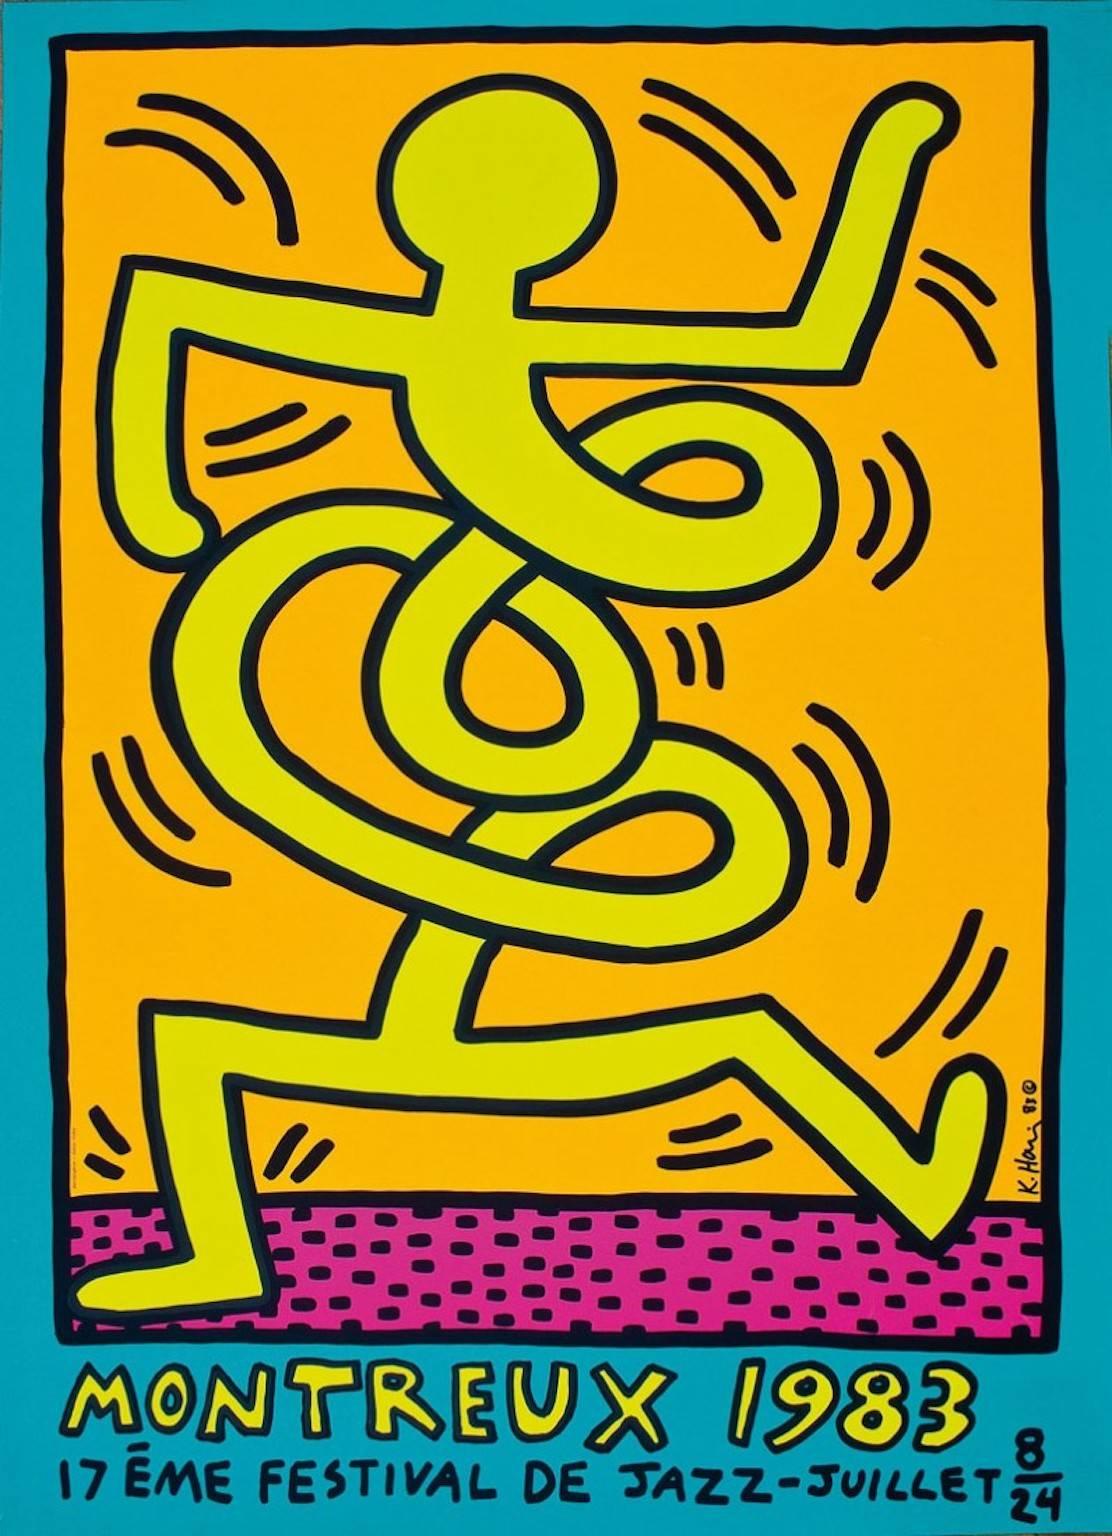 Montreux Jazz Festival (blue) - Print by Keith Haring